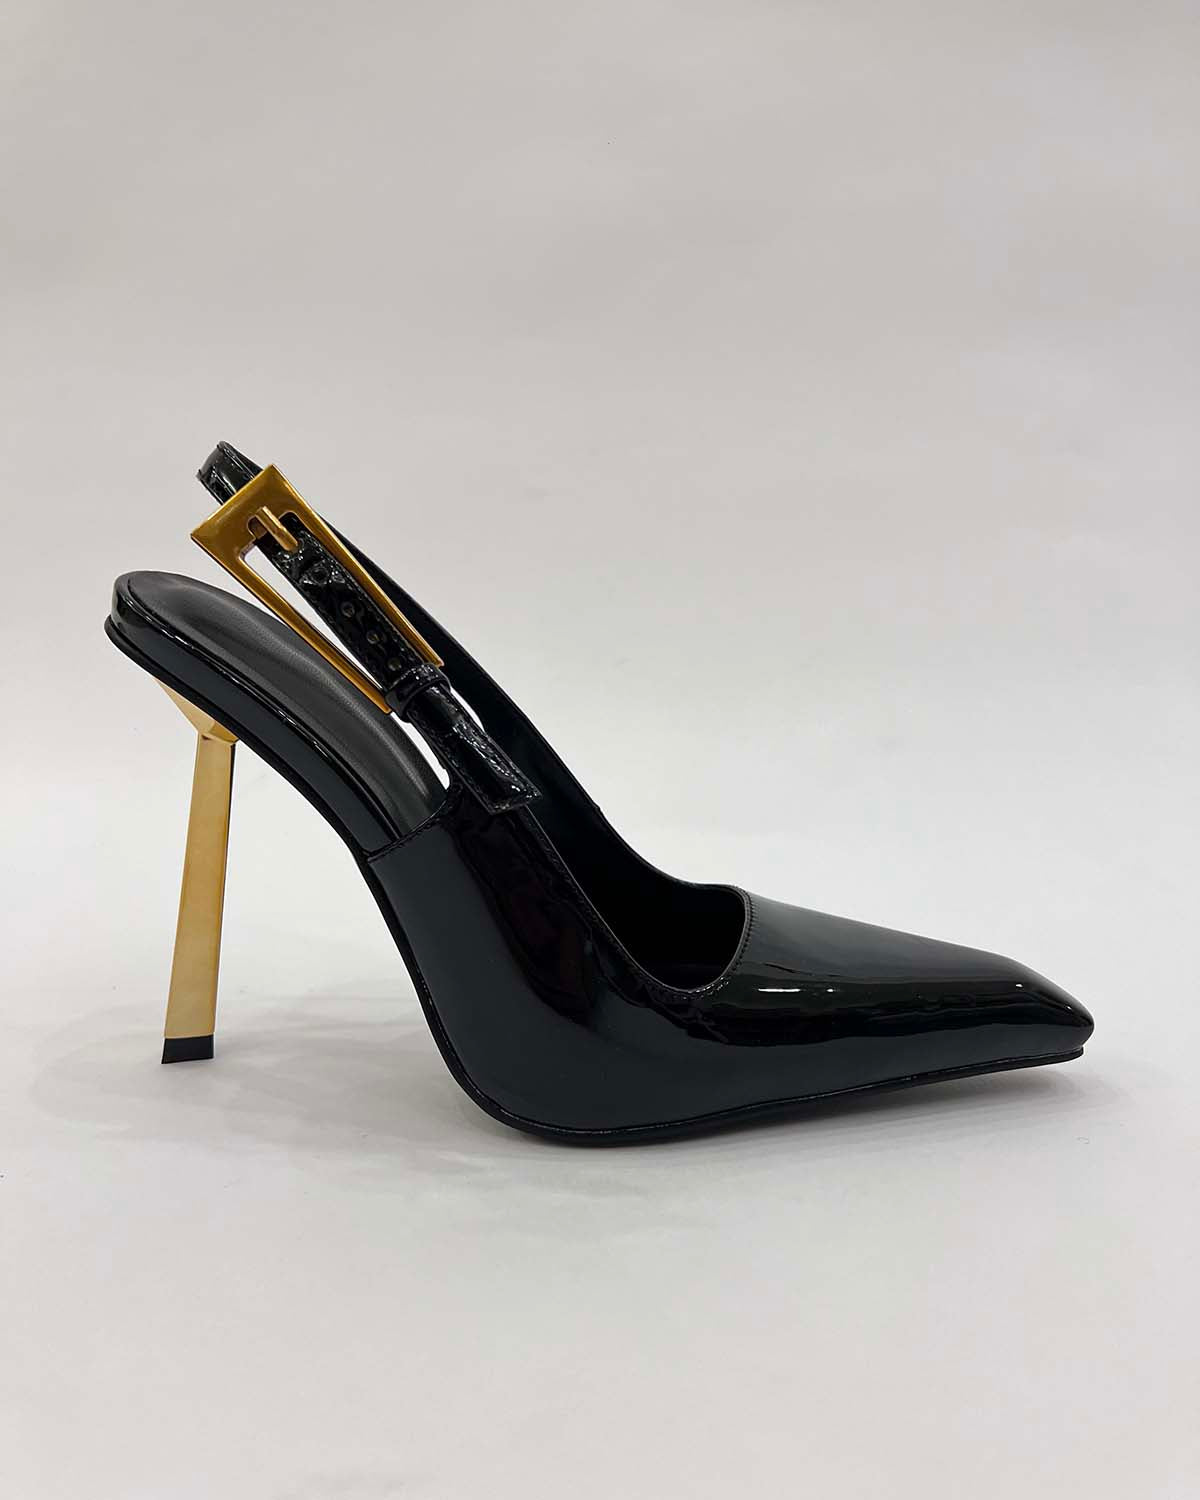 Patent leather pointed toe slingback metal heels pumps